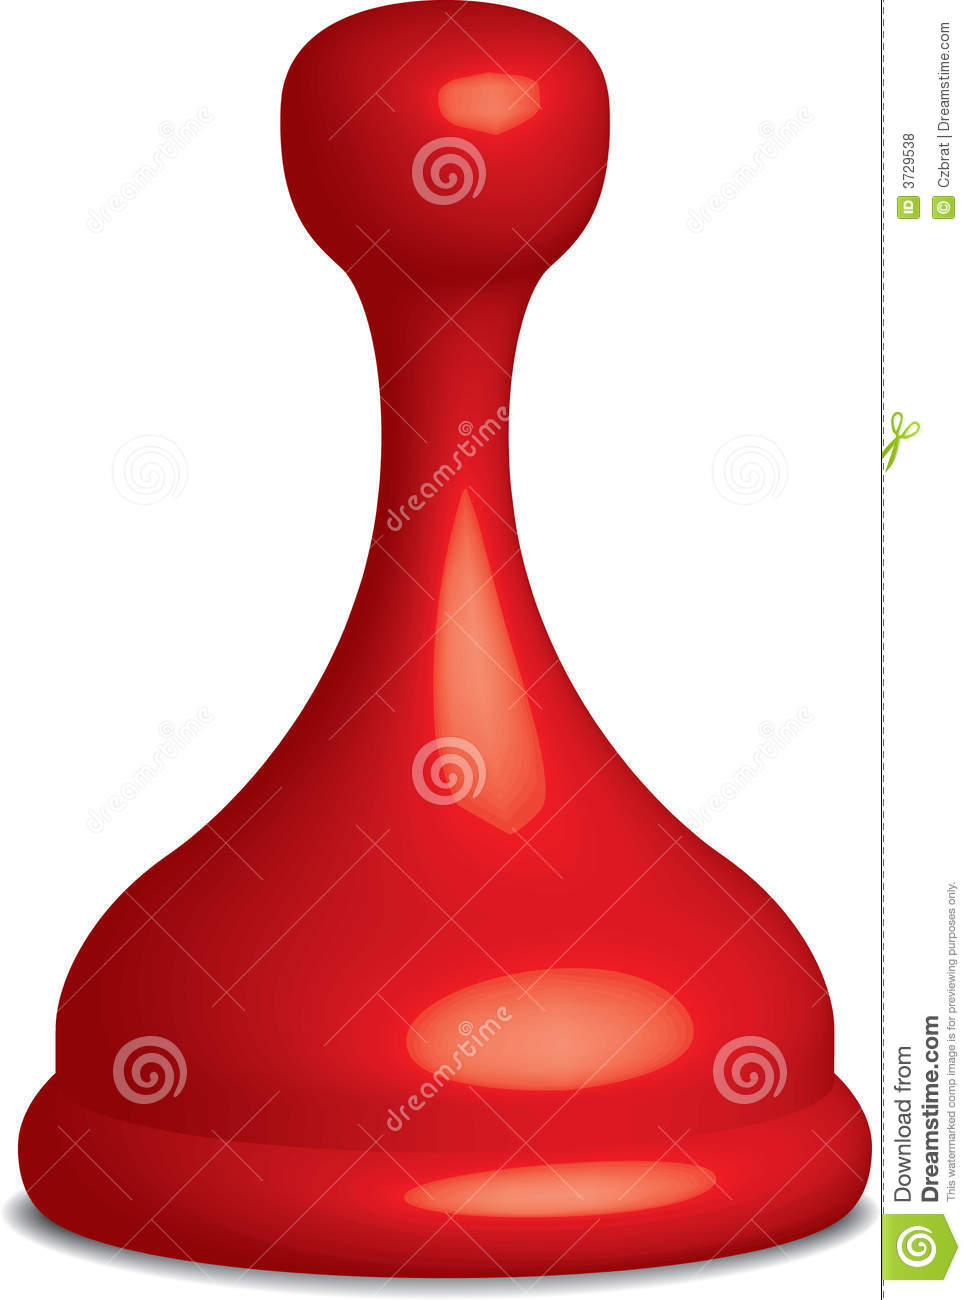 3d Render Of A Red Plastic Game Piece  Vector Image Is Included 